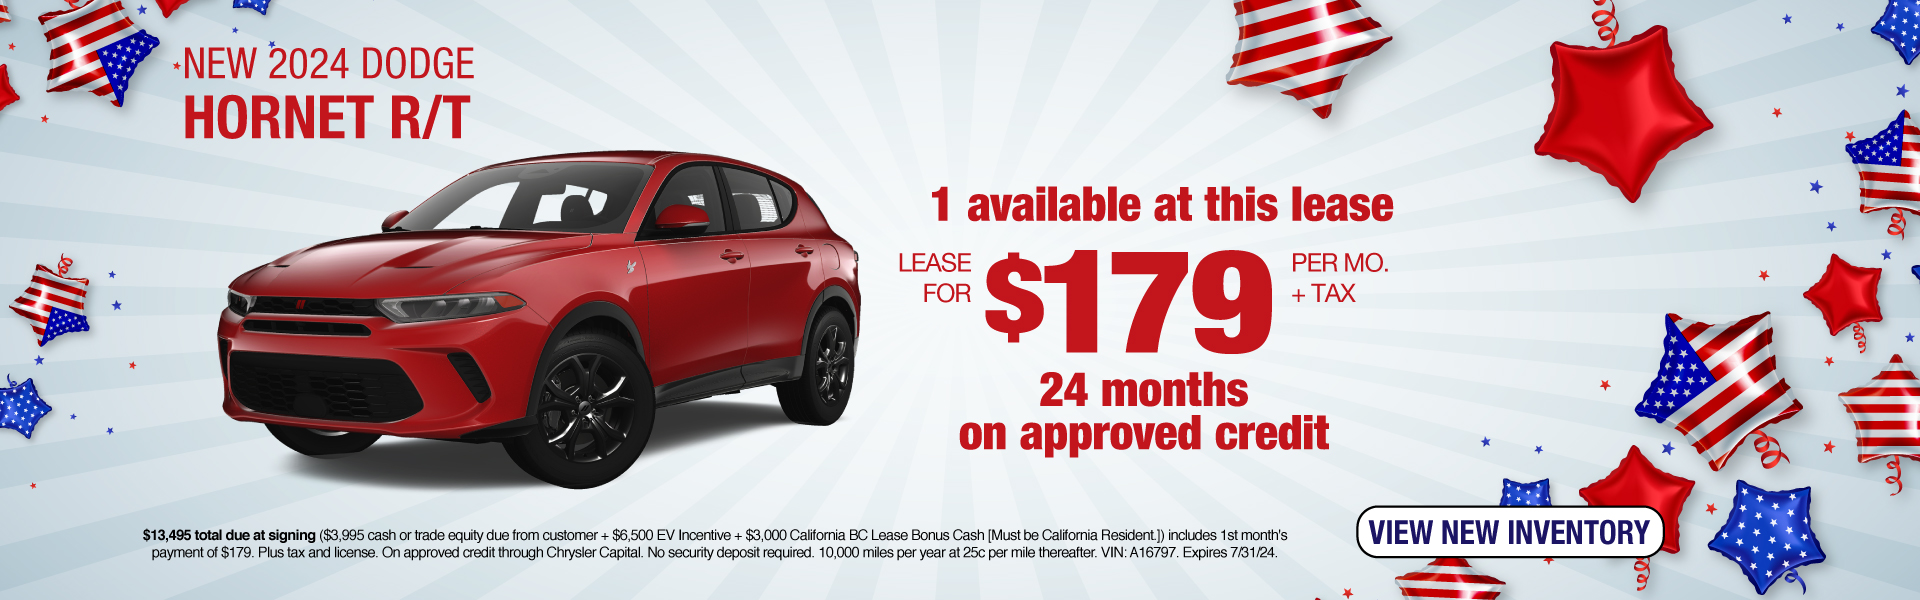 Get a New 2024 Dodge Hornet R/T lease for $179 per mo. + tax for 24 months on approved credit! Expires 7/31/24.